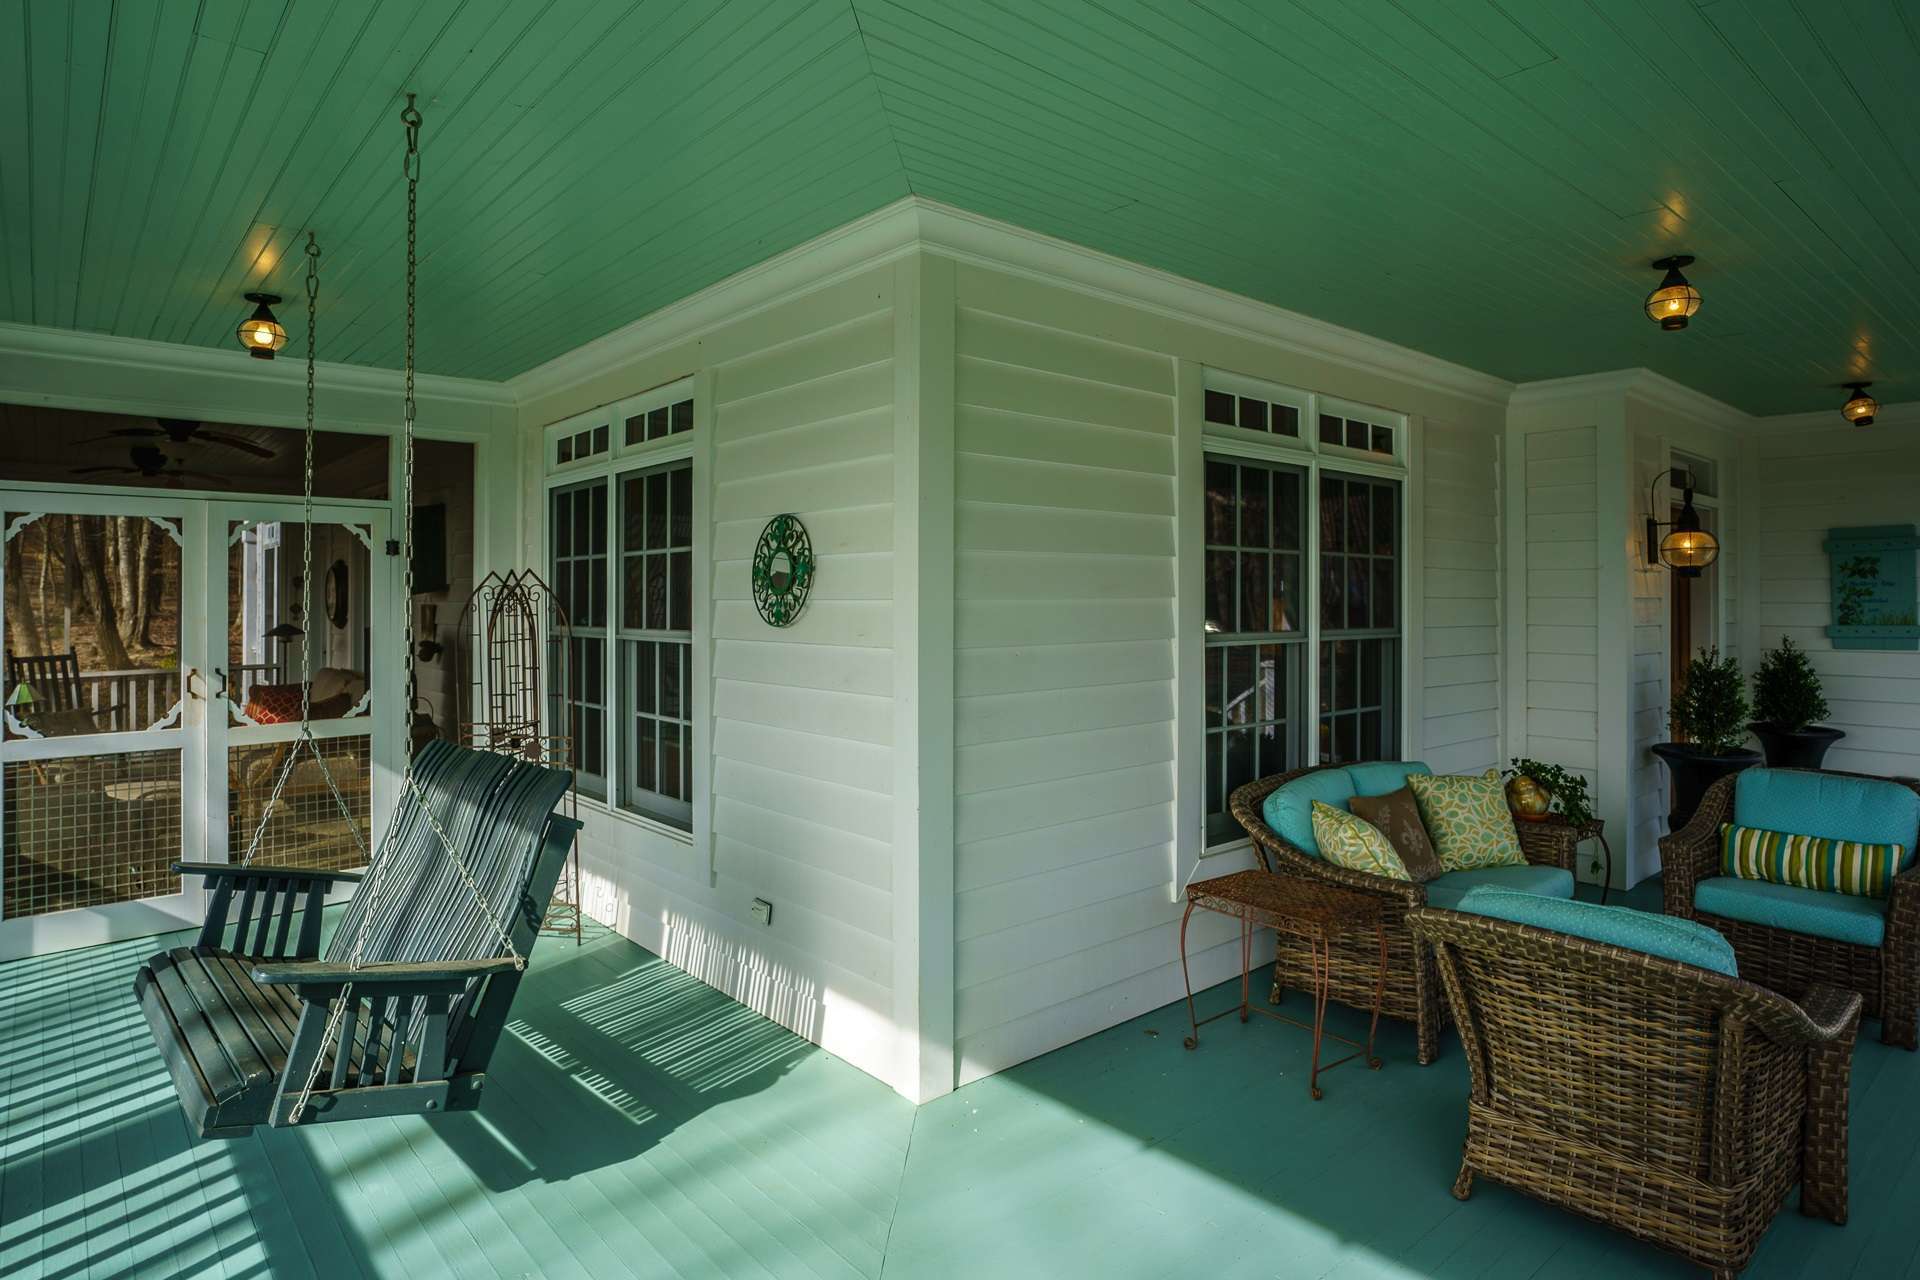 If you love to spend time on the porch, this home will delight.